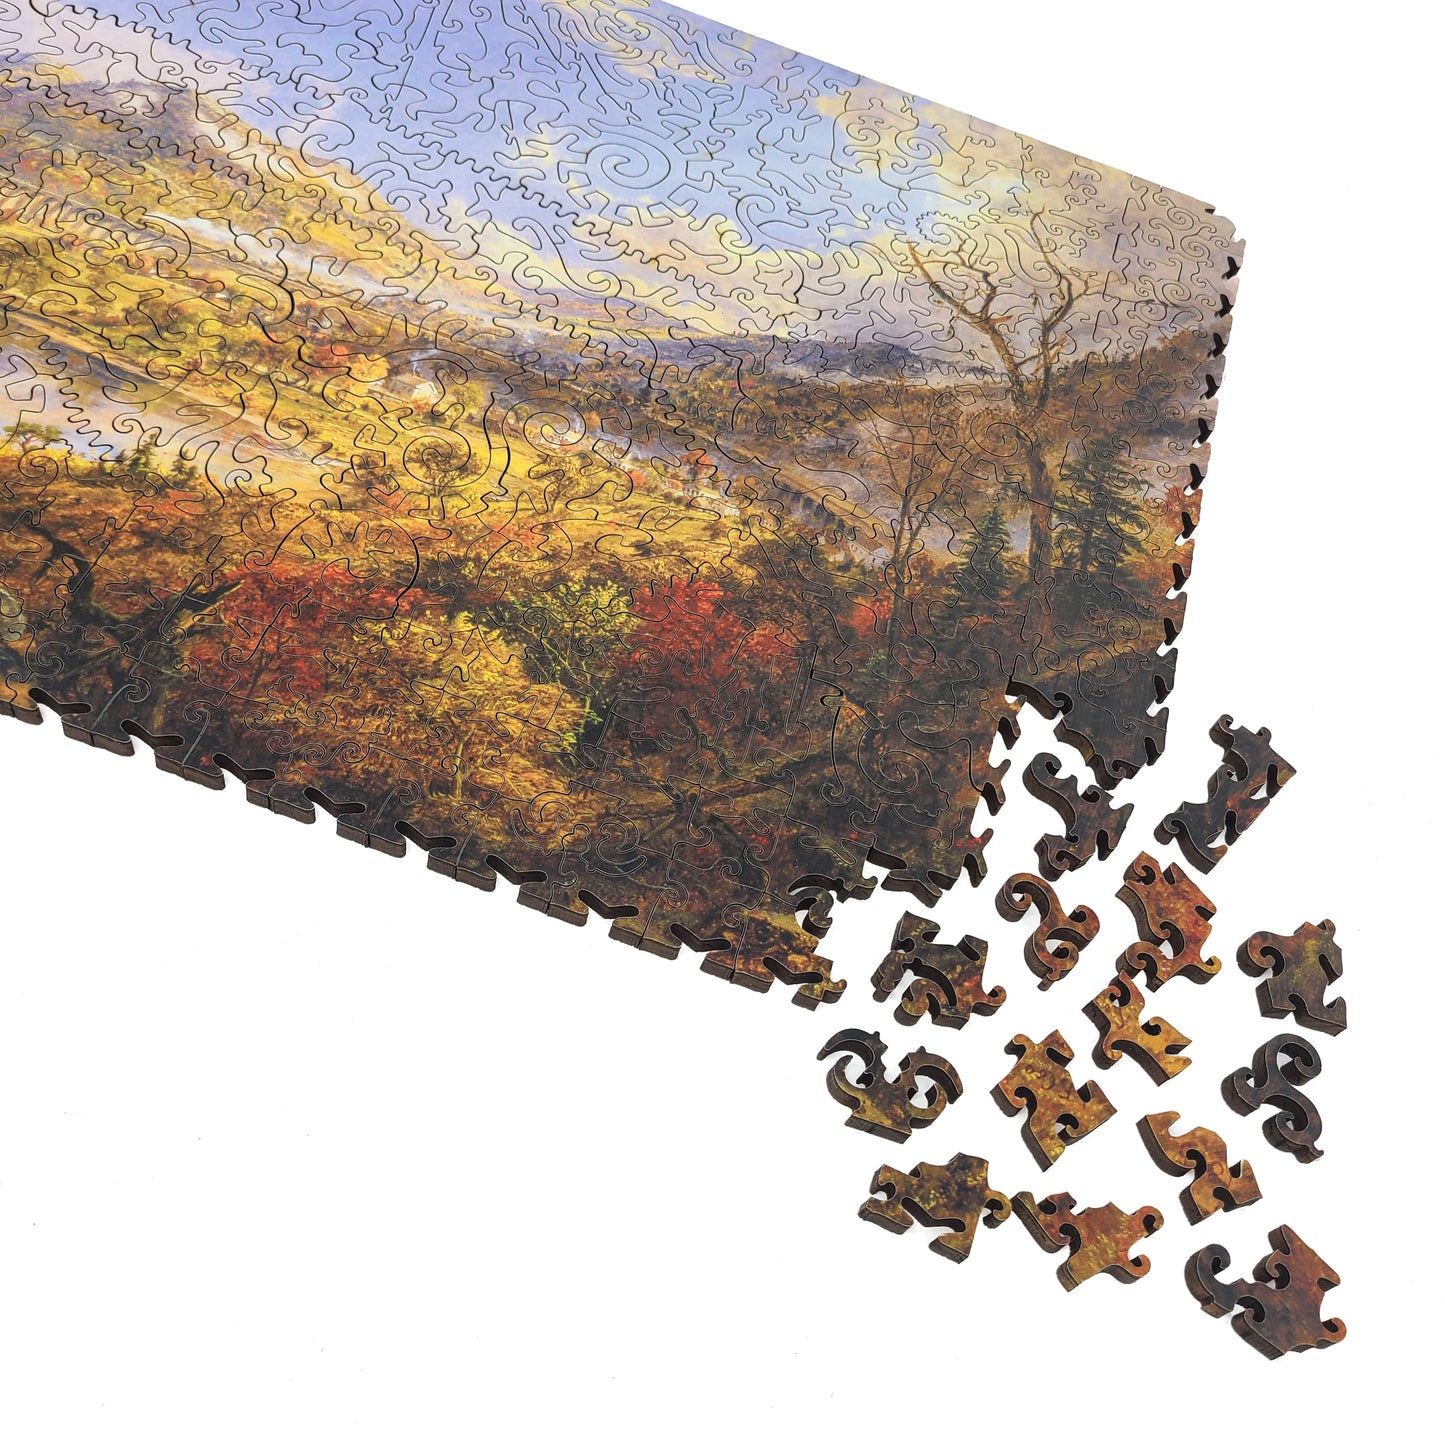 Wooden Jigsaw Puzzle with Uniquely Shaped Pieces for Adults - 440 Pieces - Starrucca Viaduct, Pennsylvania